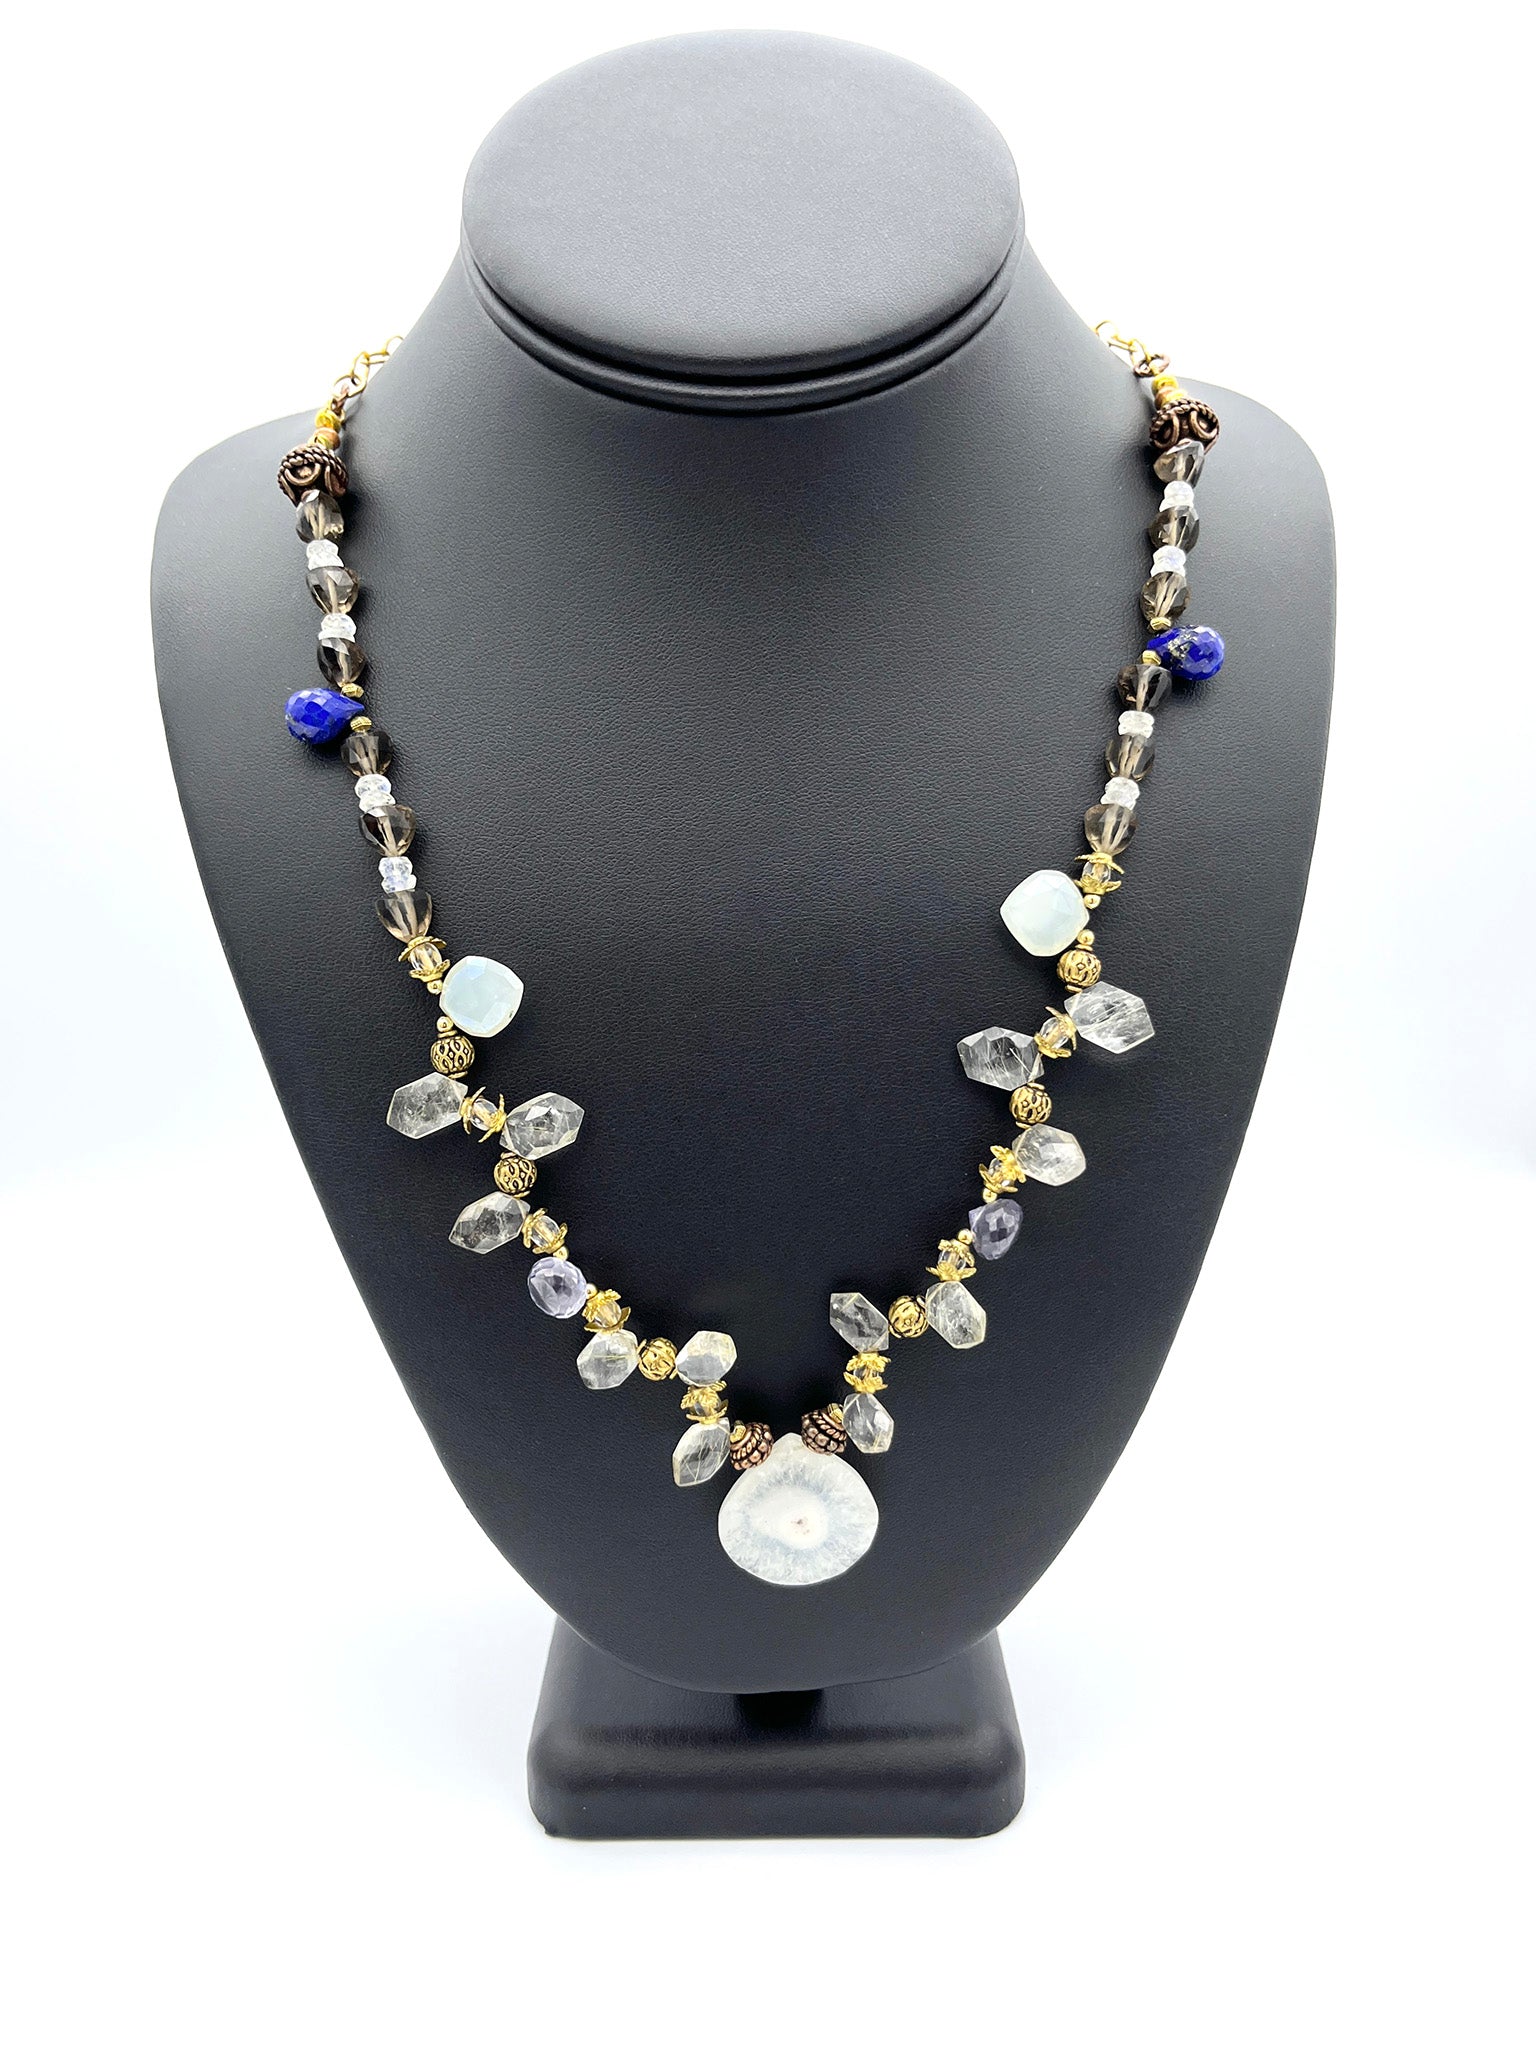 Mixed gemstone necklace with gold chain